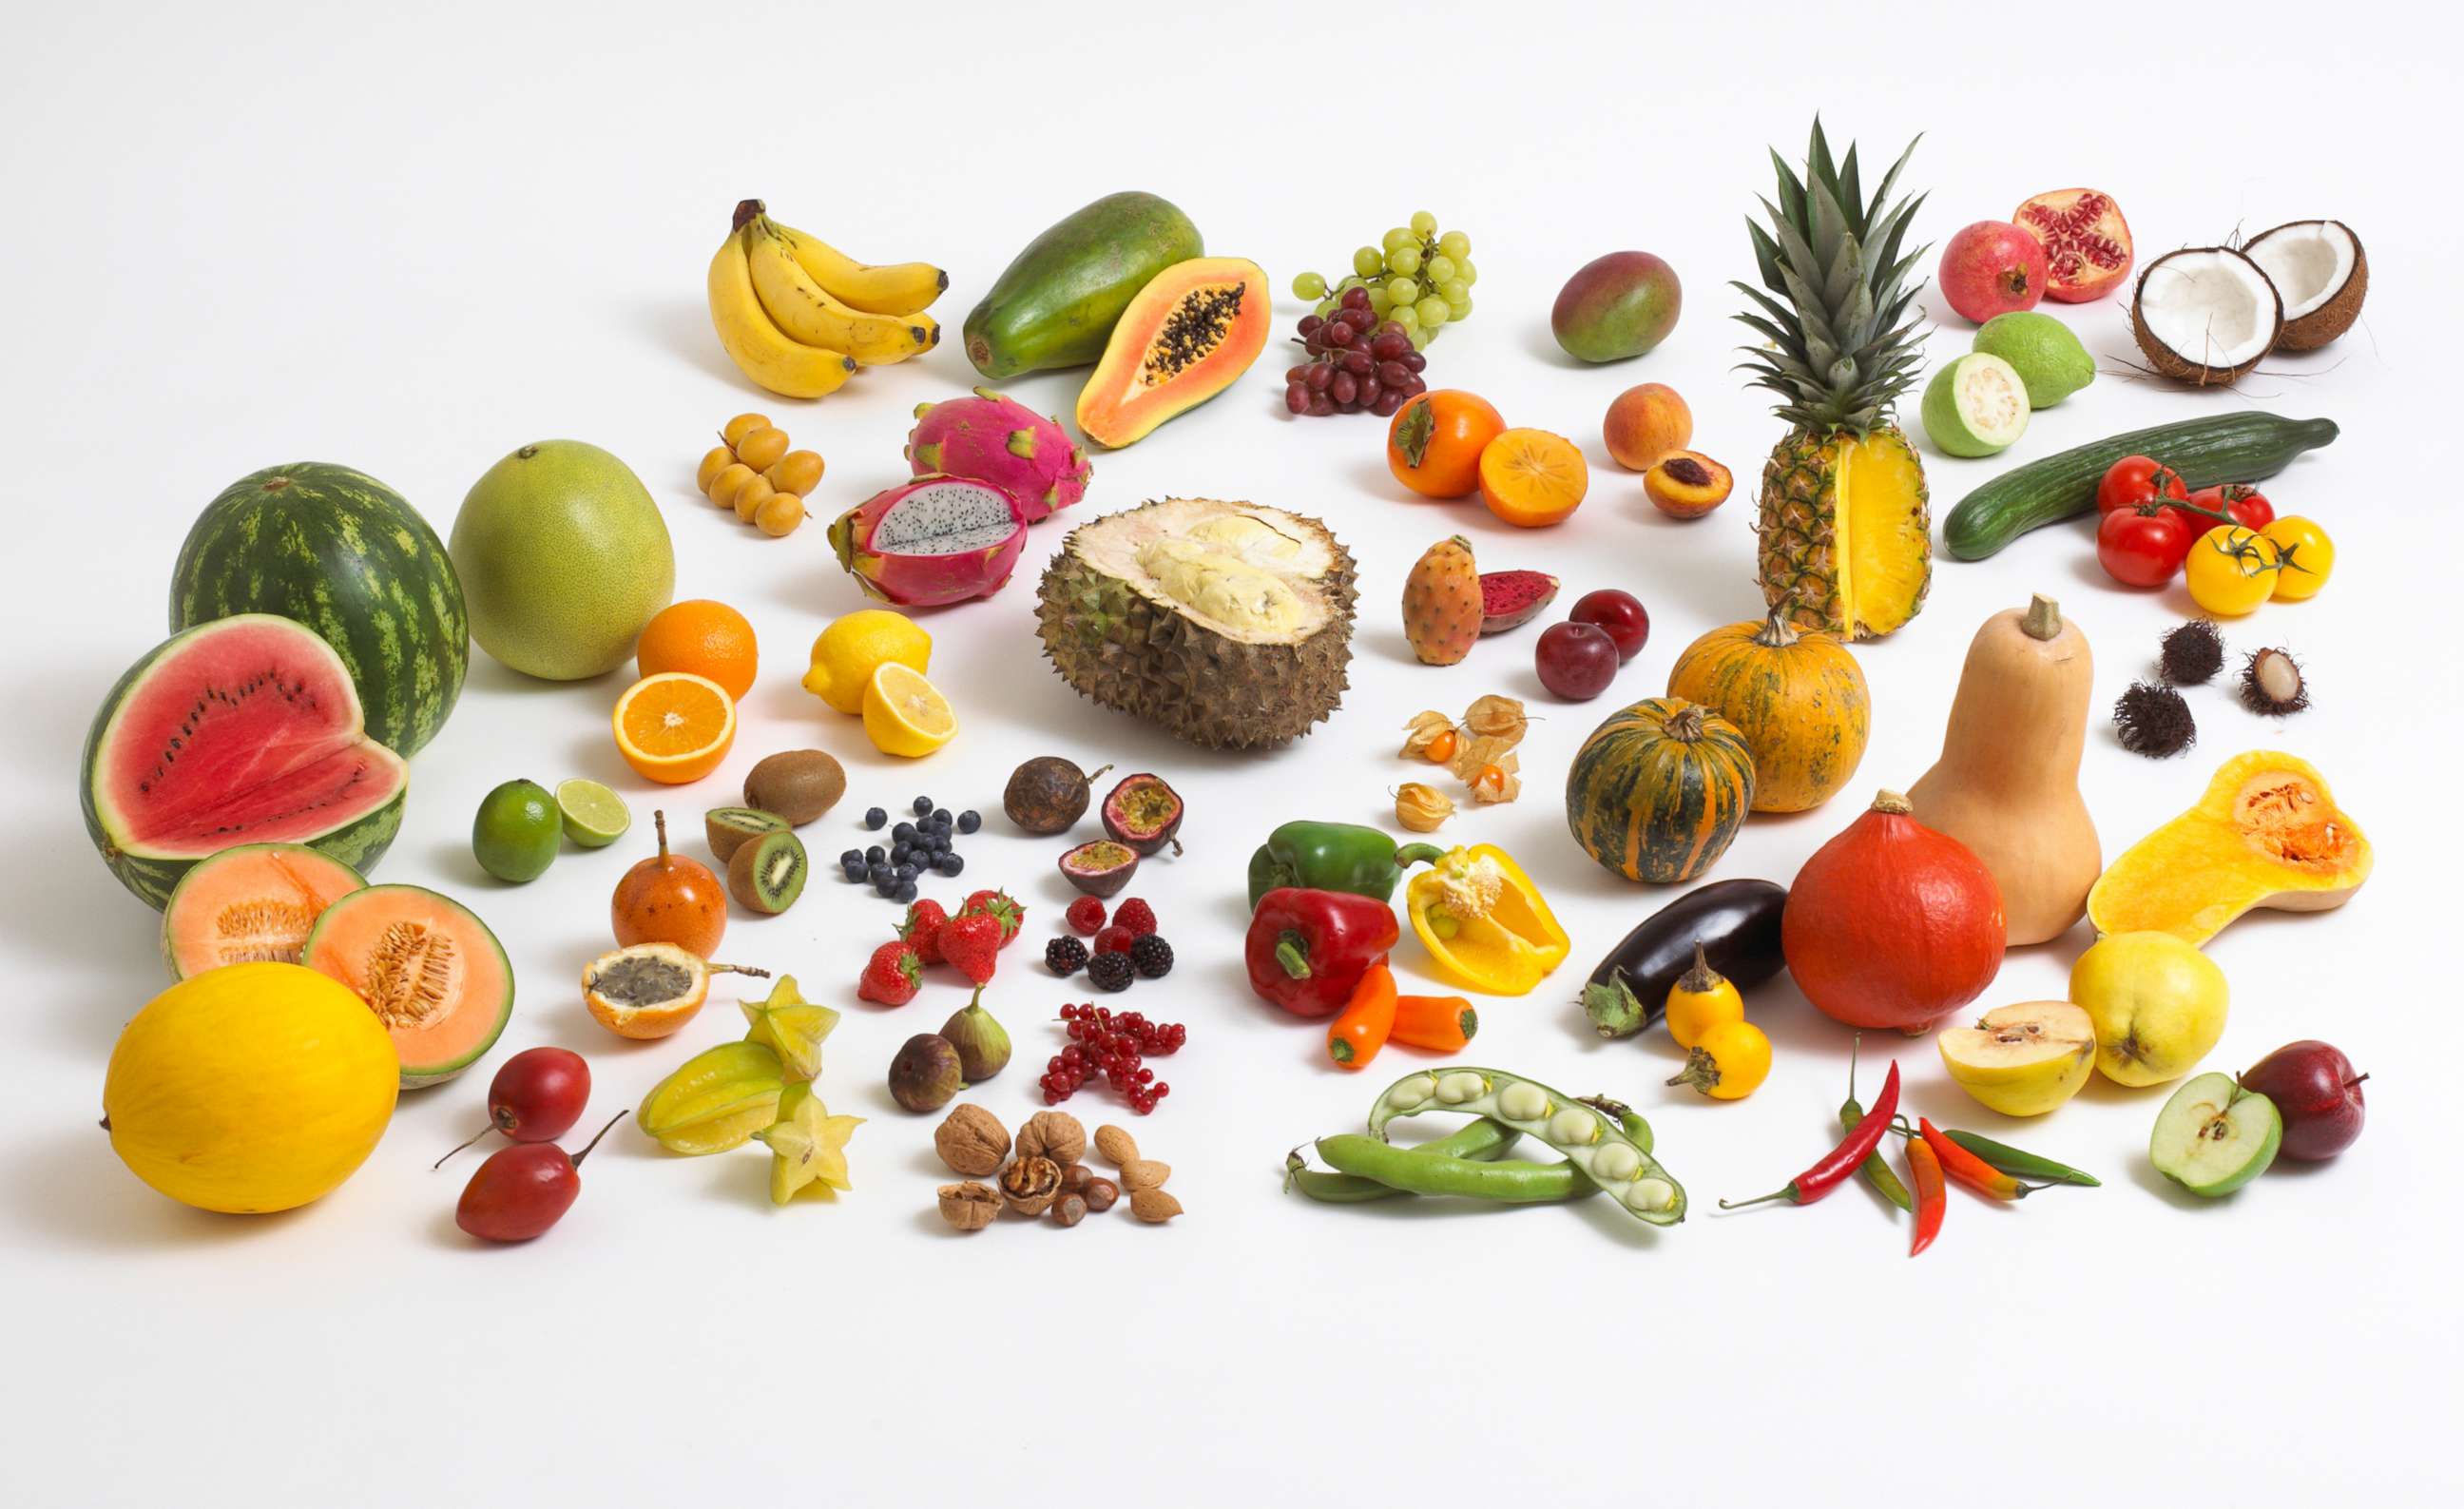 PHOTO: Fruits, vegetables and nuts are pictured in an undated stock photo.